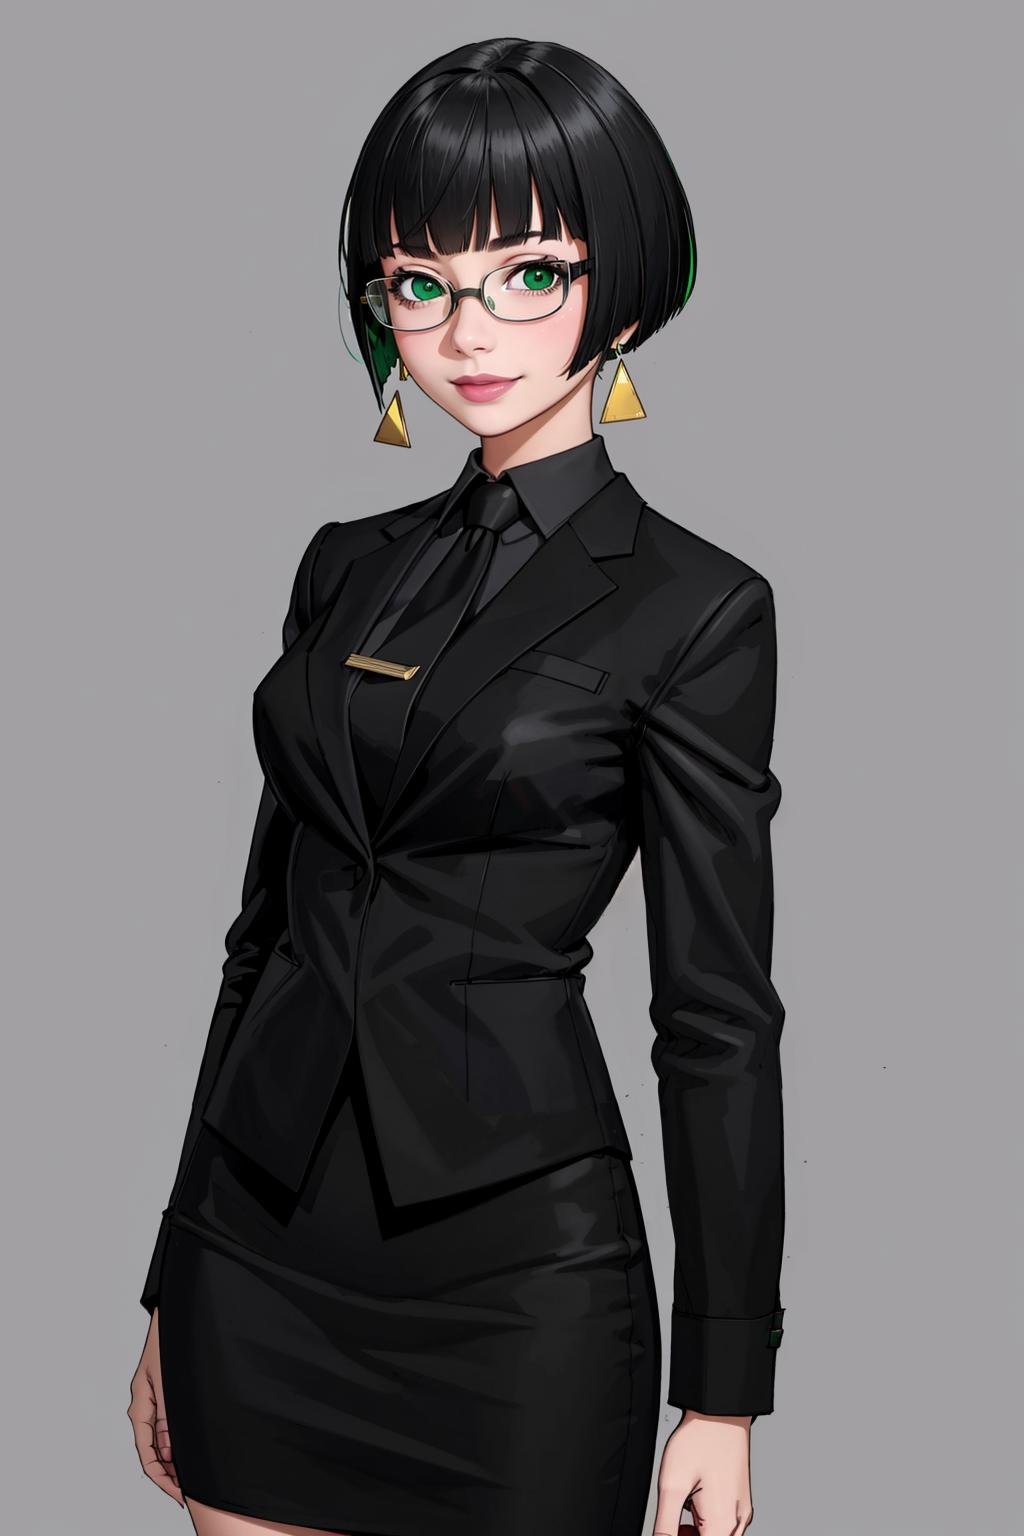 ((Masterpiece, best quality,edgQuality))smiling,solo,1girl,posing for a picture,edgAllmind,bob cut,blunt bangs,two tone hair,golden earrings,black suit,necktie, green eyes,pencil skirt,glasses<lora:edgArmoredCore6Allmind:0.8>